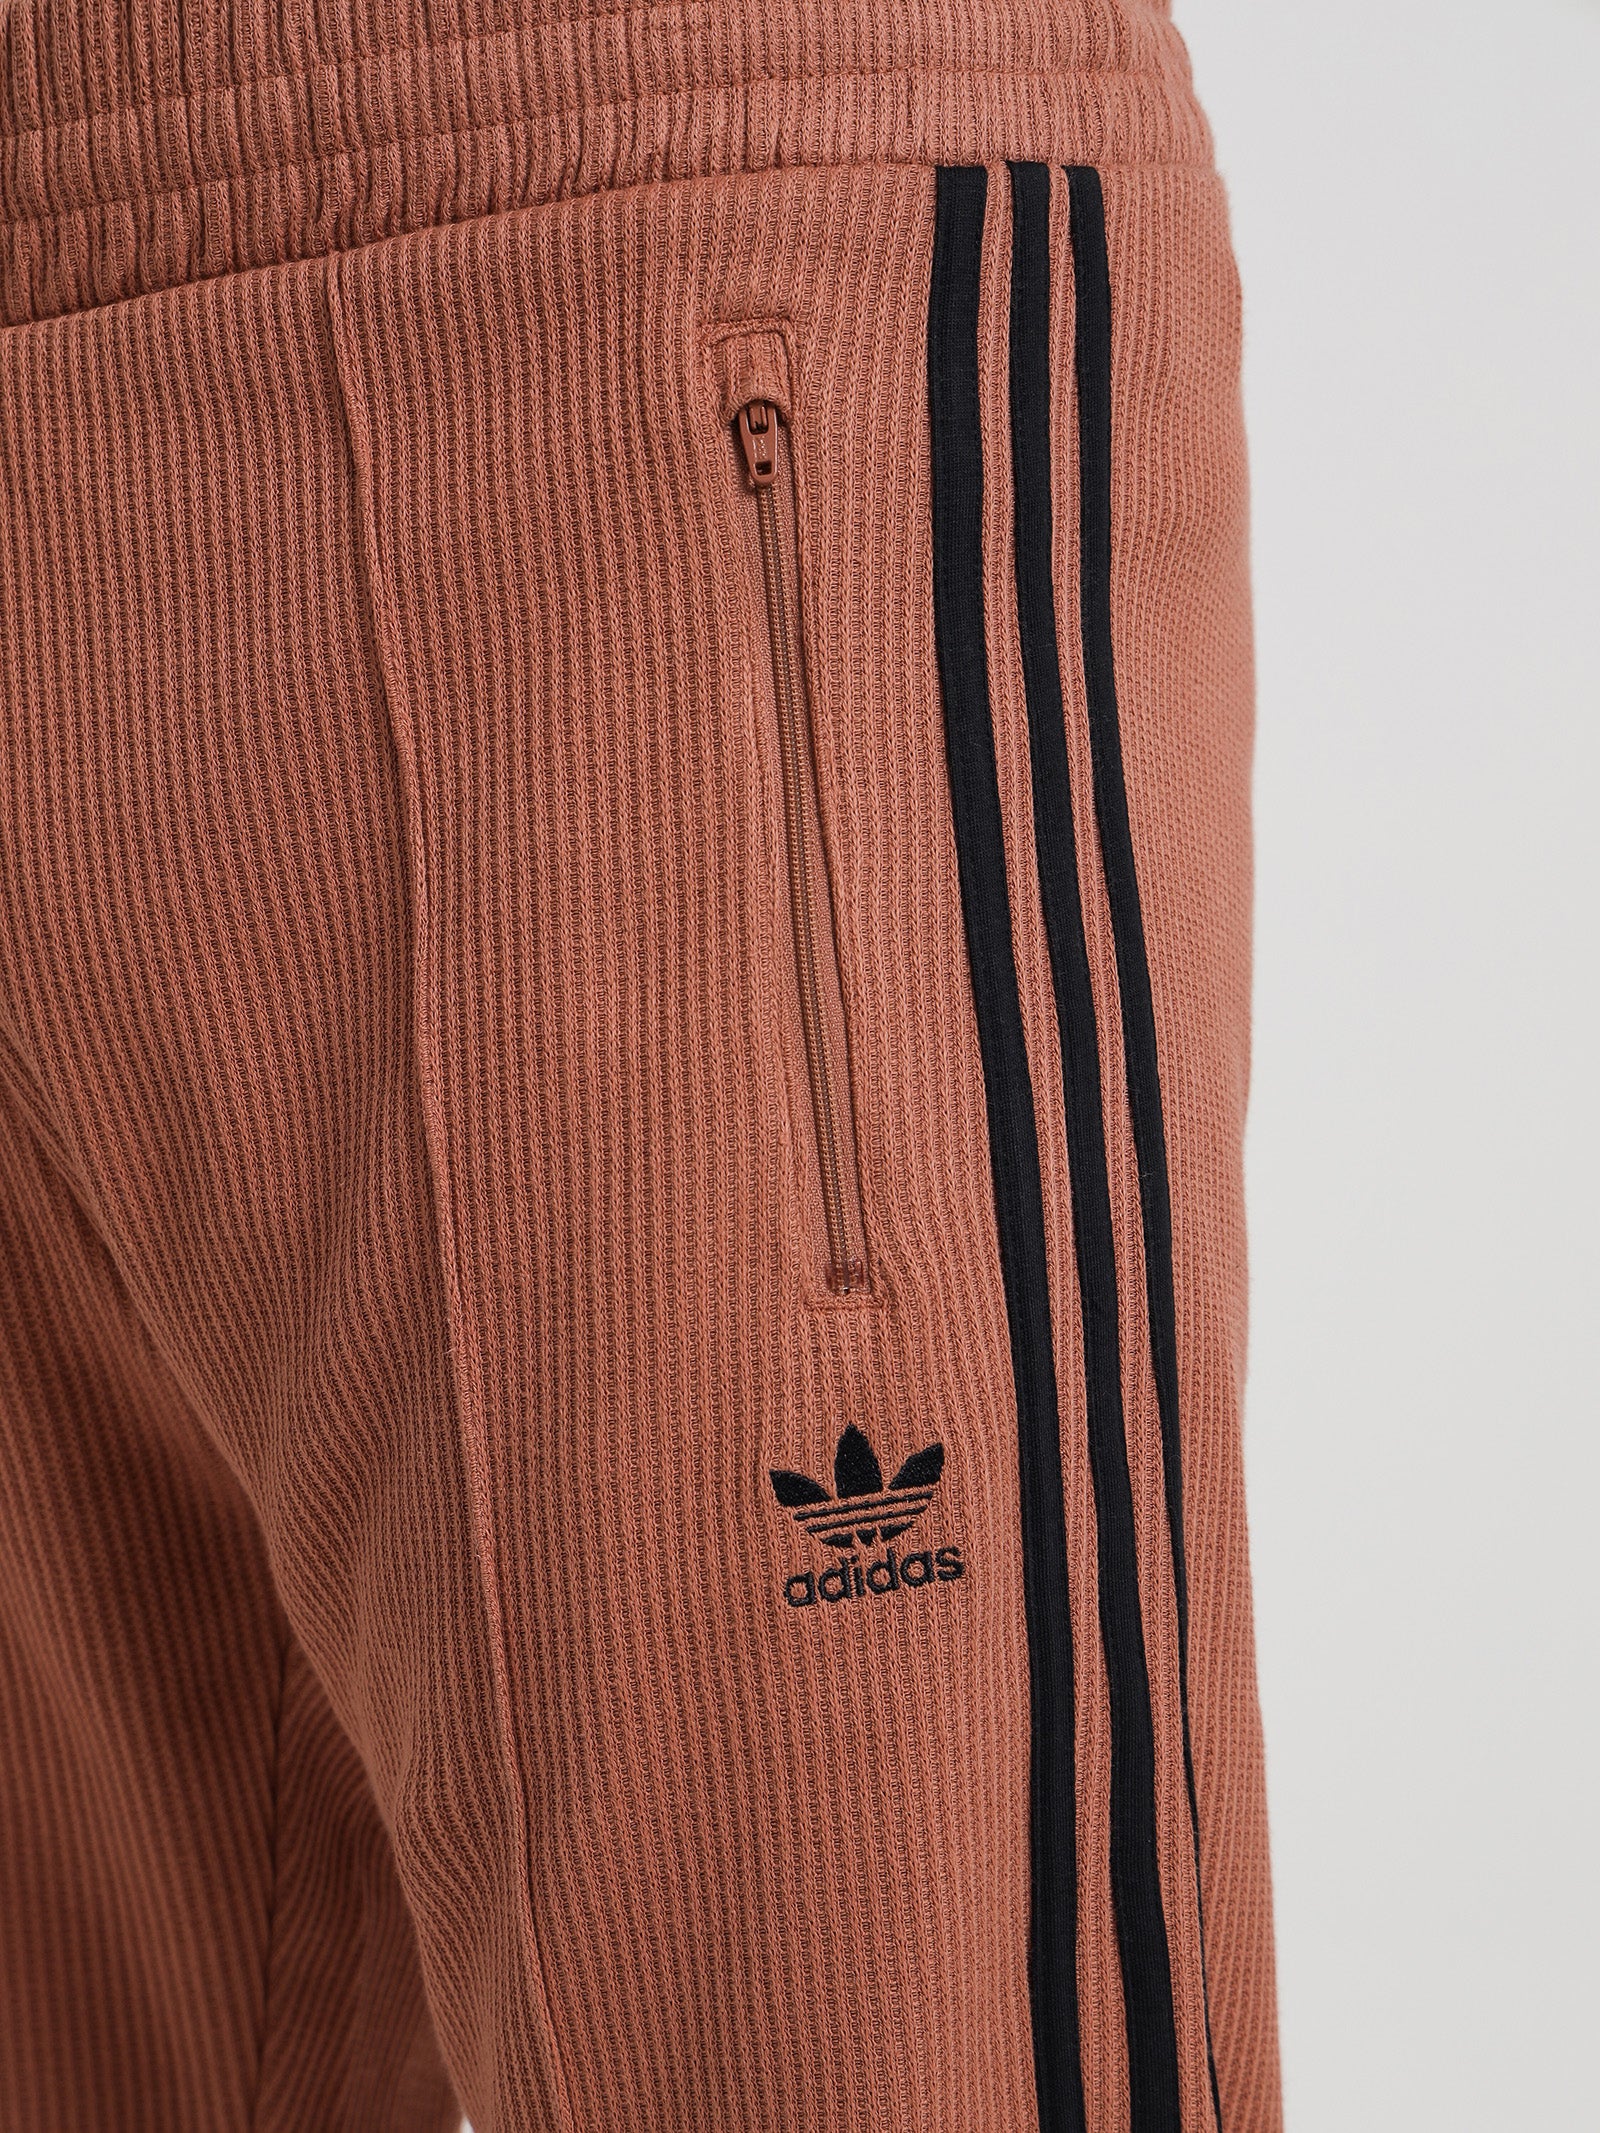 Adicolor Classics Waffle Beckenbauer Track Pants in Clay Strata